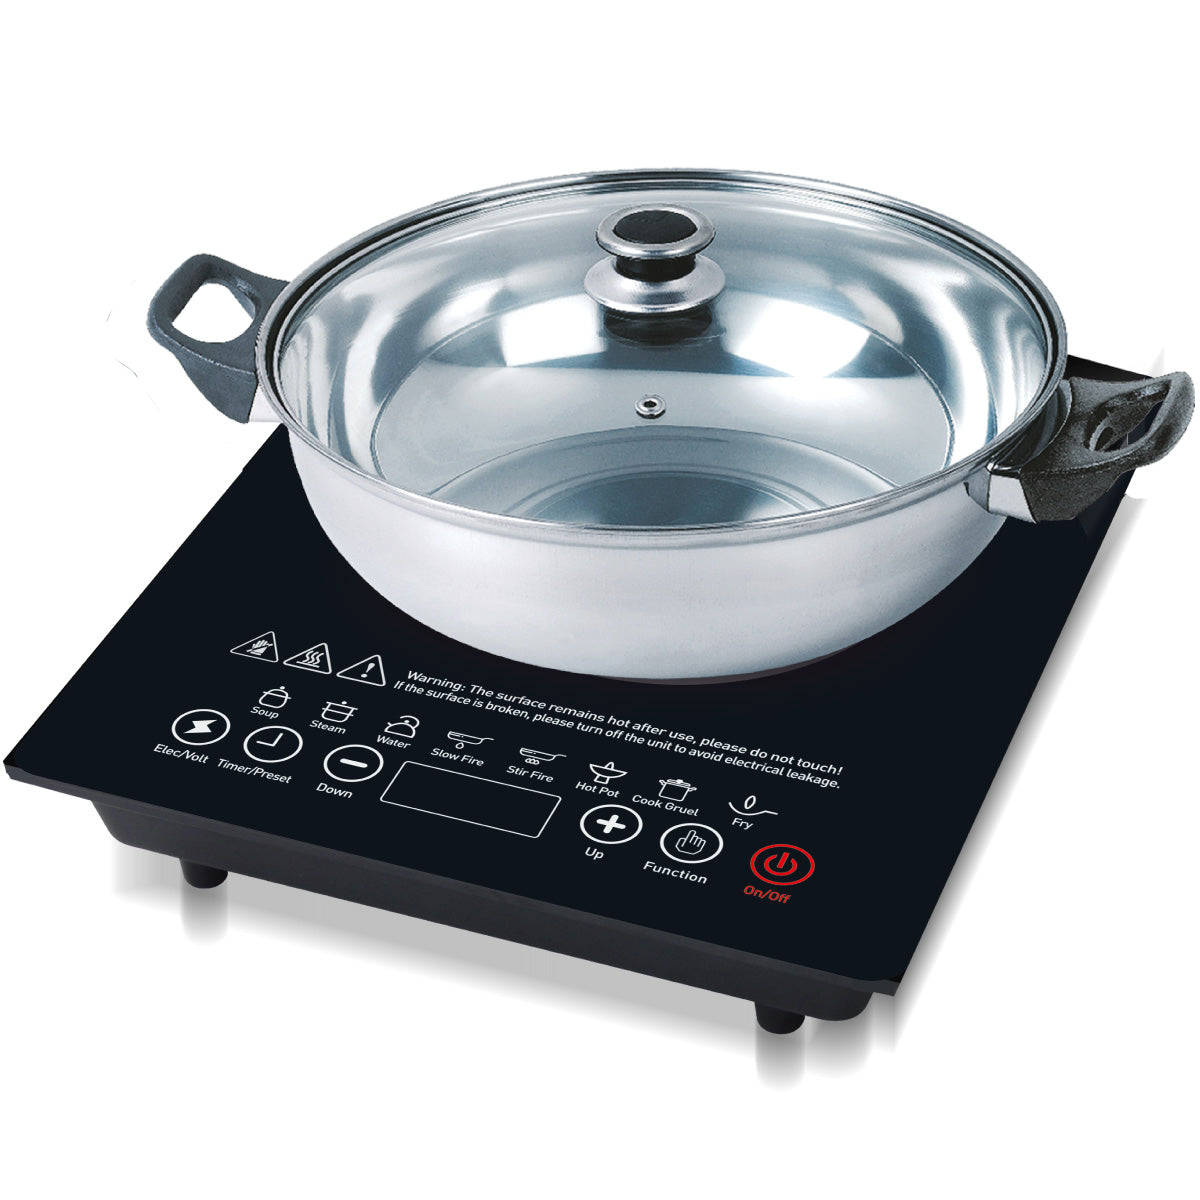 Steamboat Induction Cooker with Stainless Steel Pot (PPIC888)